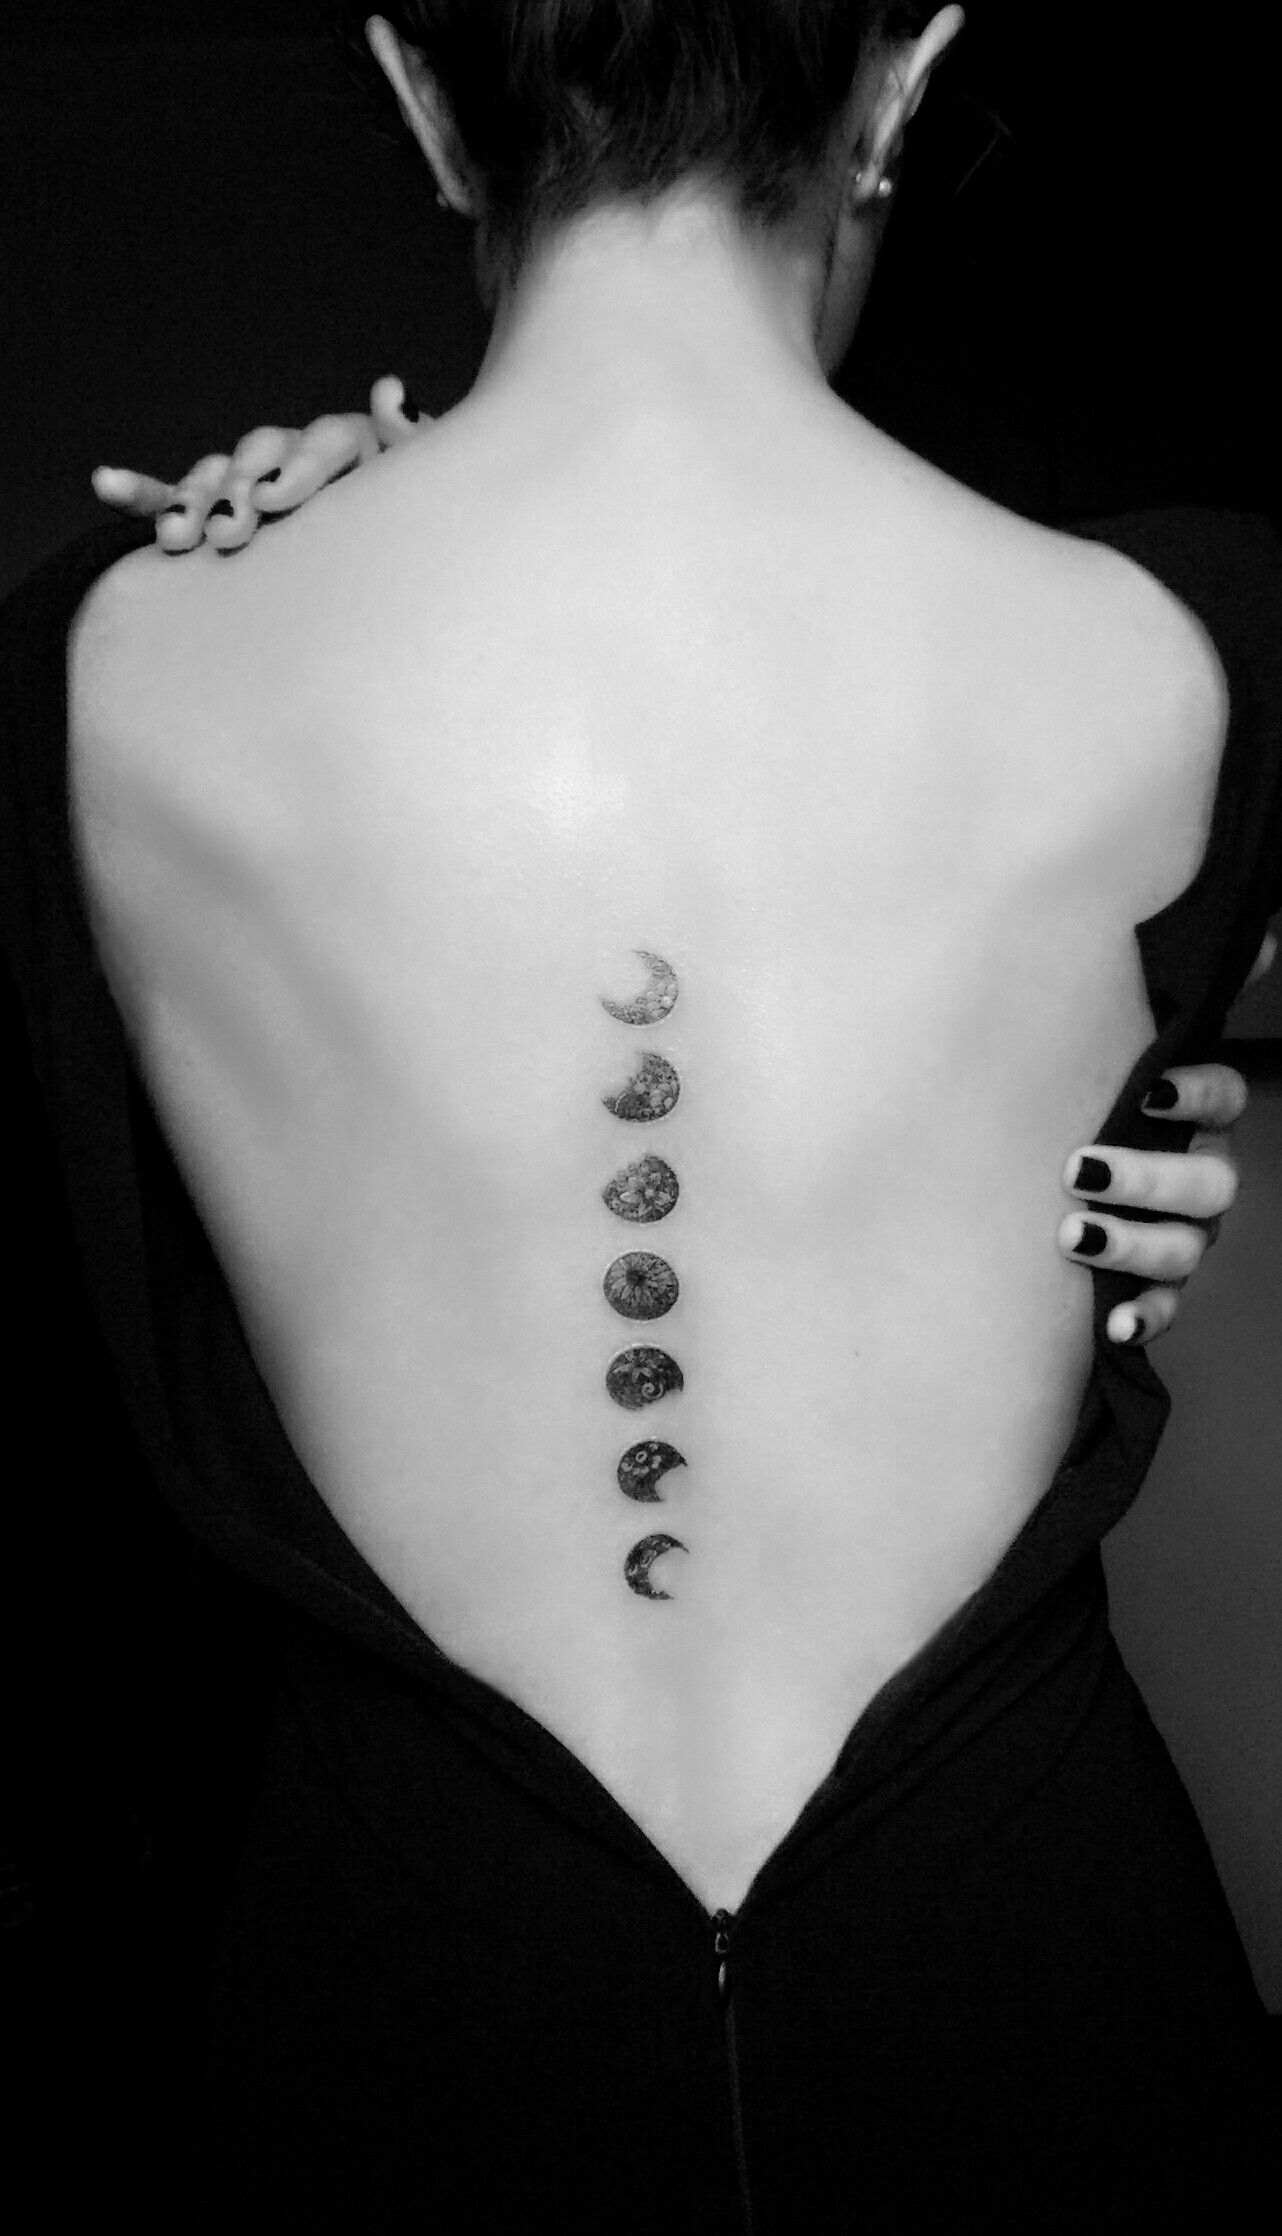 Spine Tattoo Moon Phases Floral Tattoo Back Tattoo Ink Spine pertaini...